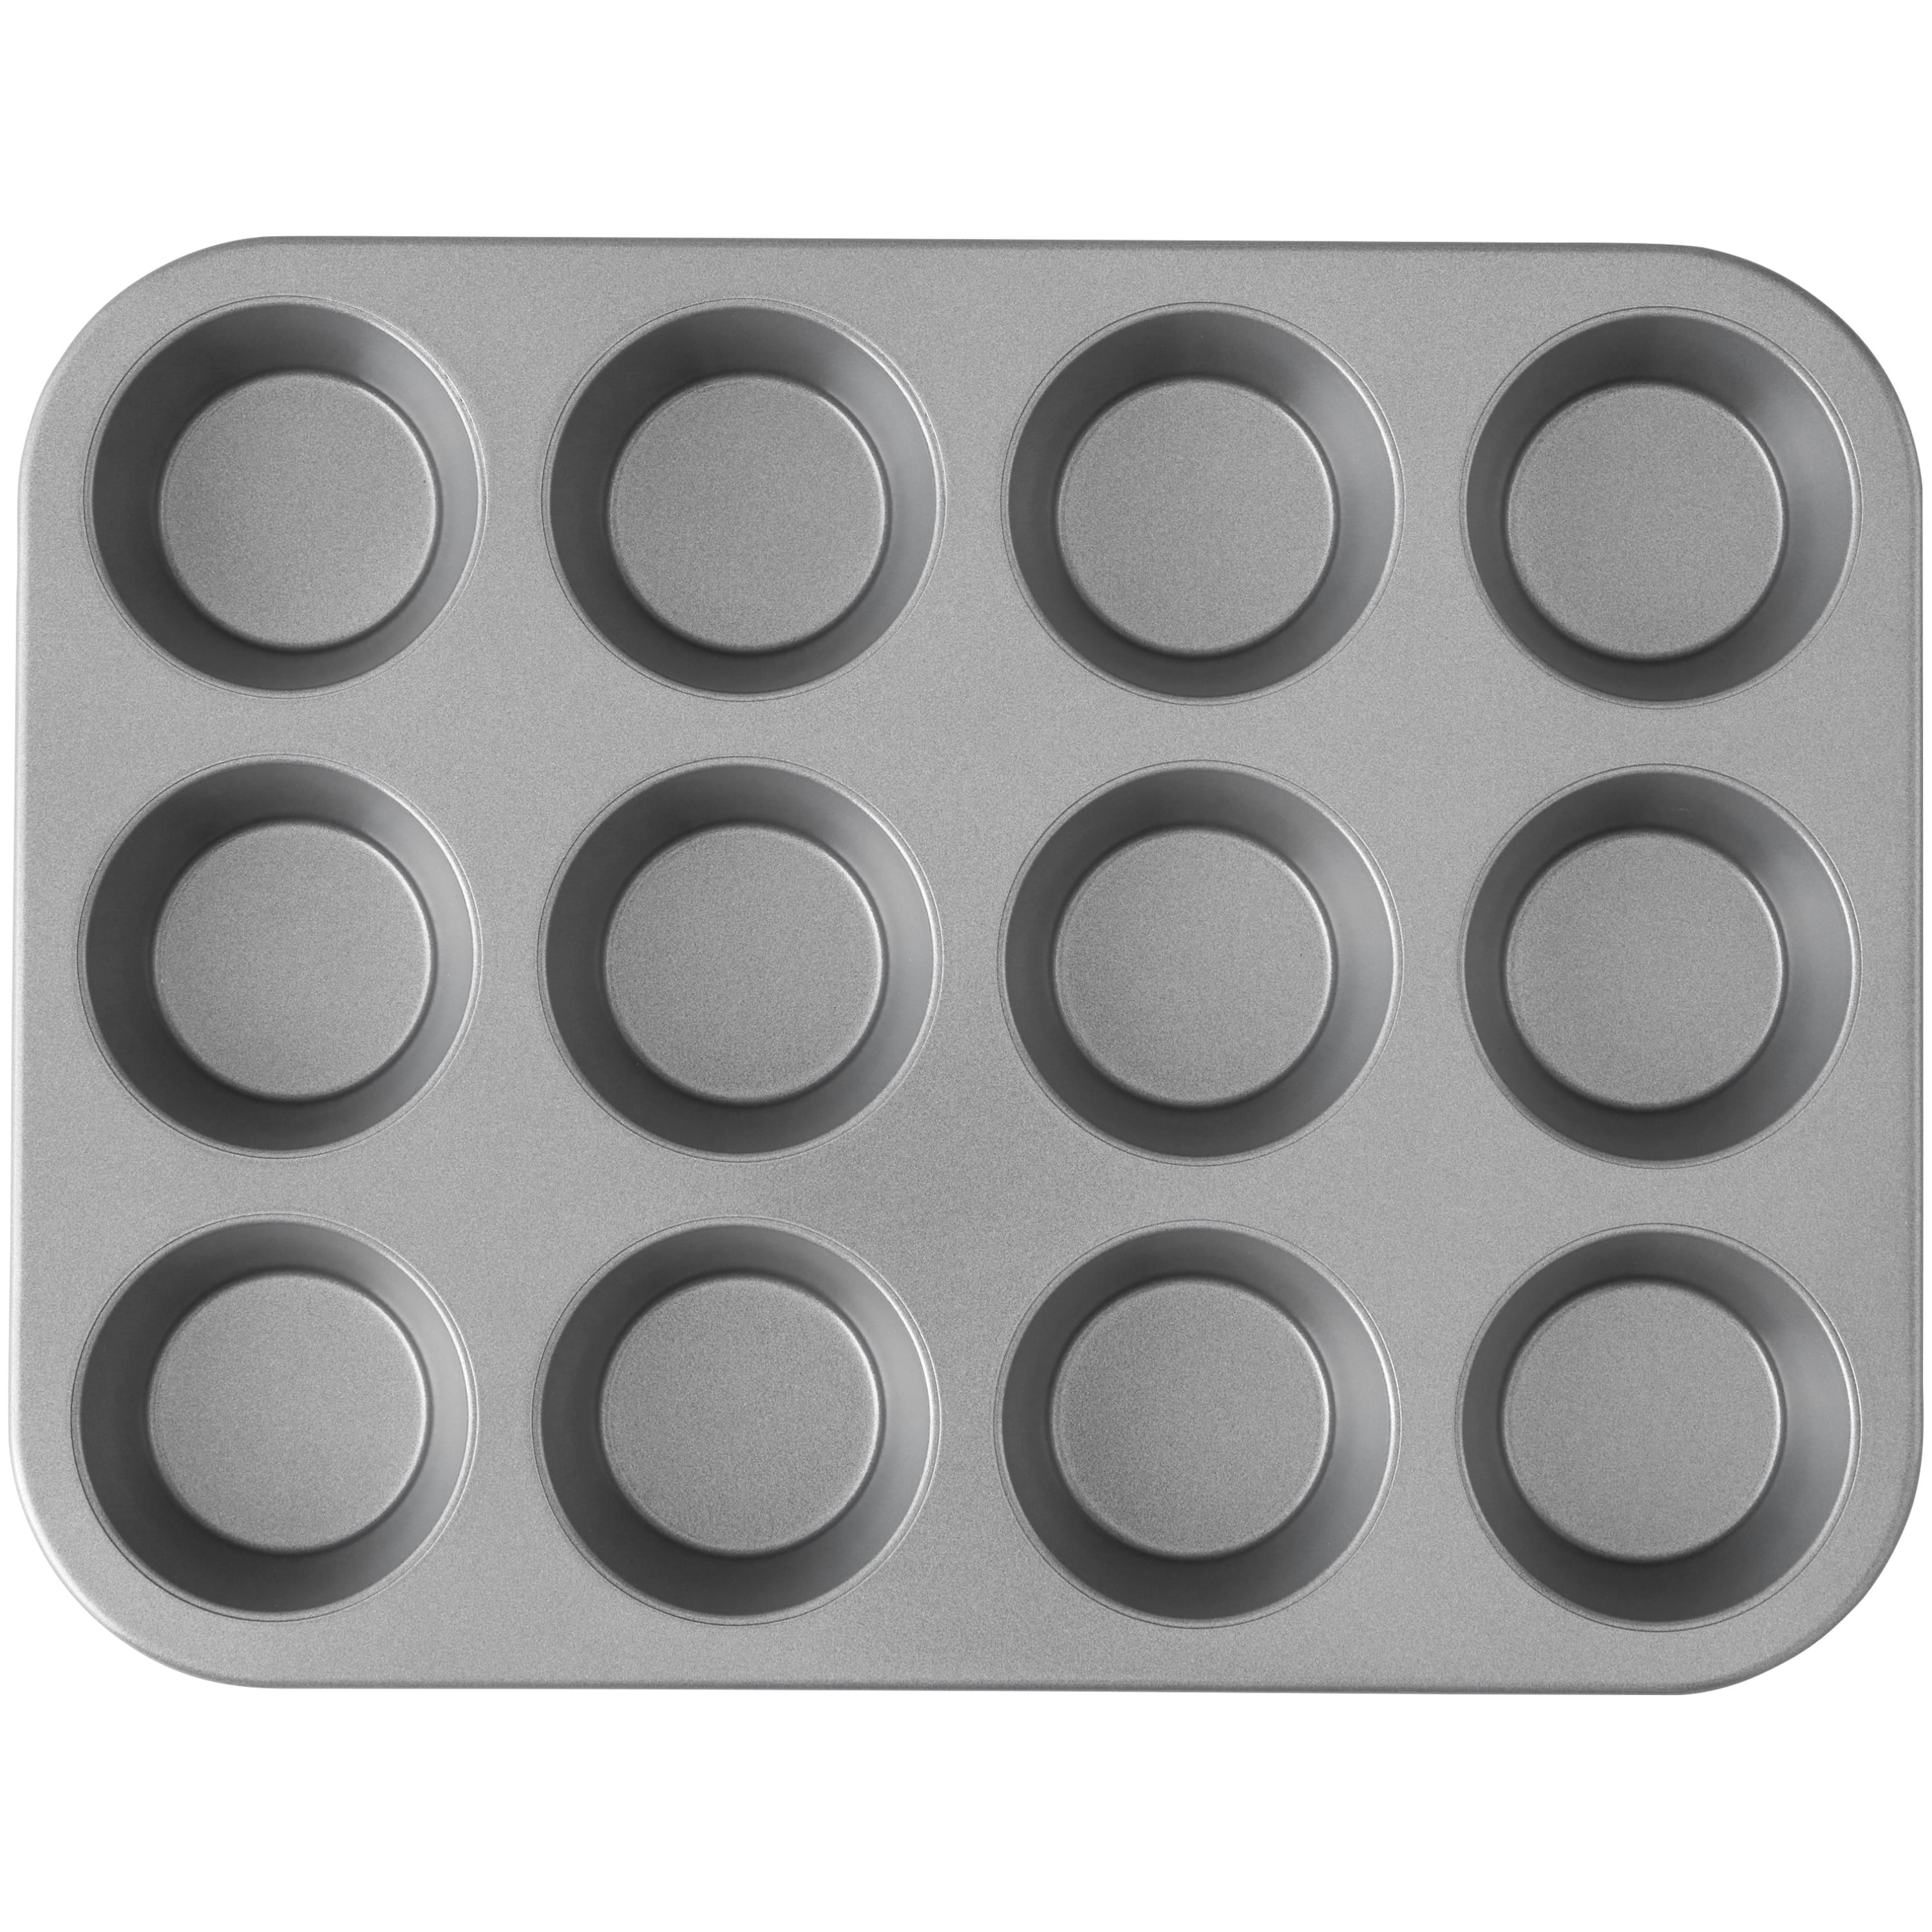 Non Stick Oven Baking Tray Roasting Tins Muffins Great for Xmas Dinner Turkey 